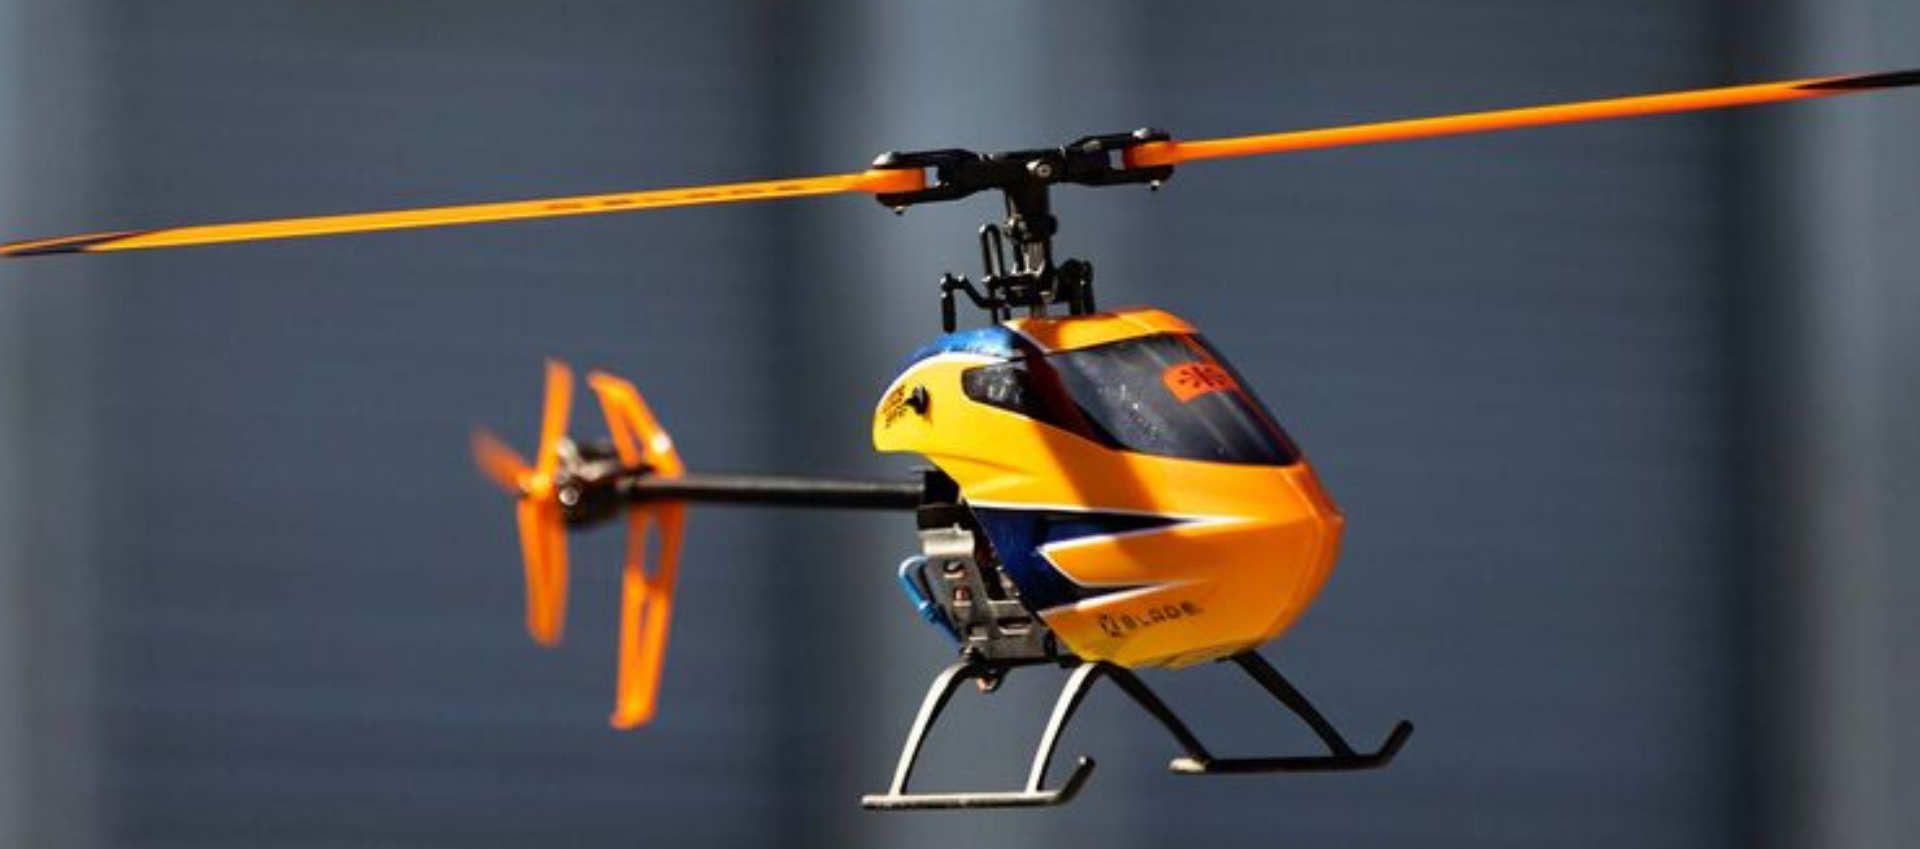 Brushless Rc Helicopter: Factors Affecting the Cost of a Brushless RC Helicopter